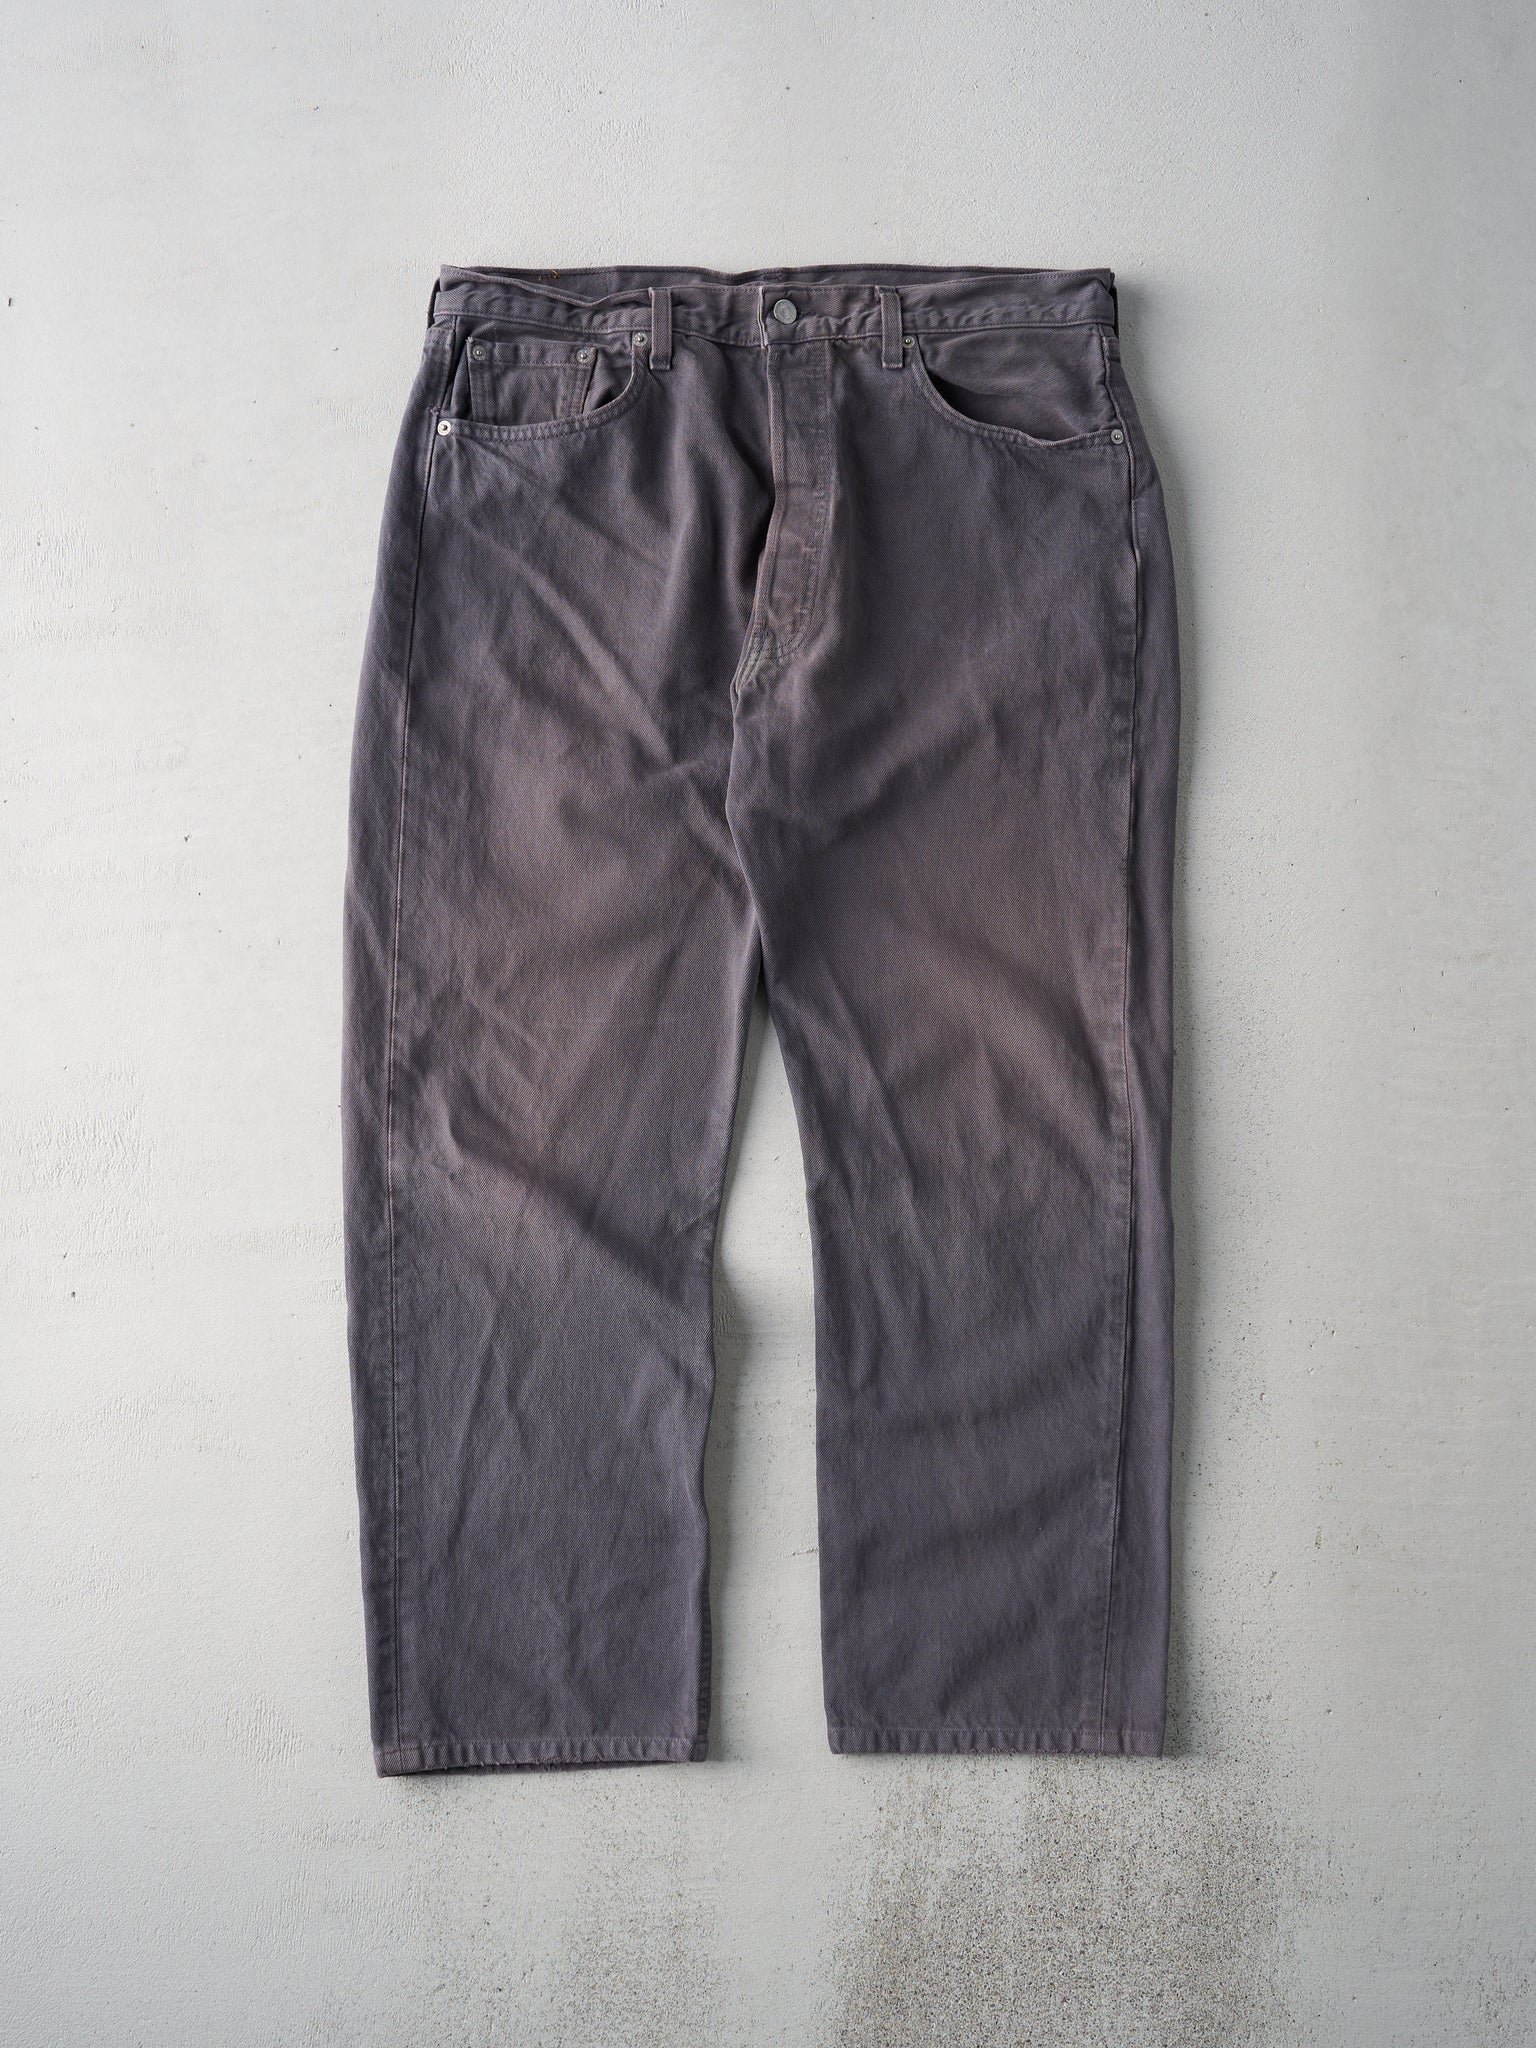 Vintage 90s Faded Charcoal Grey Levis 501s (36x28.5)